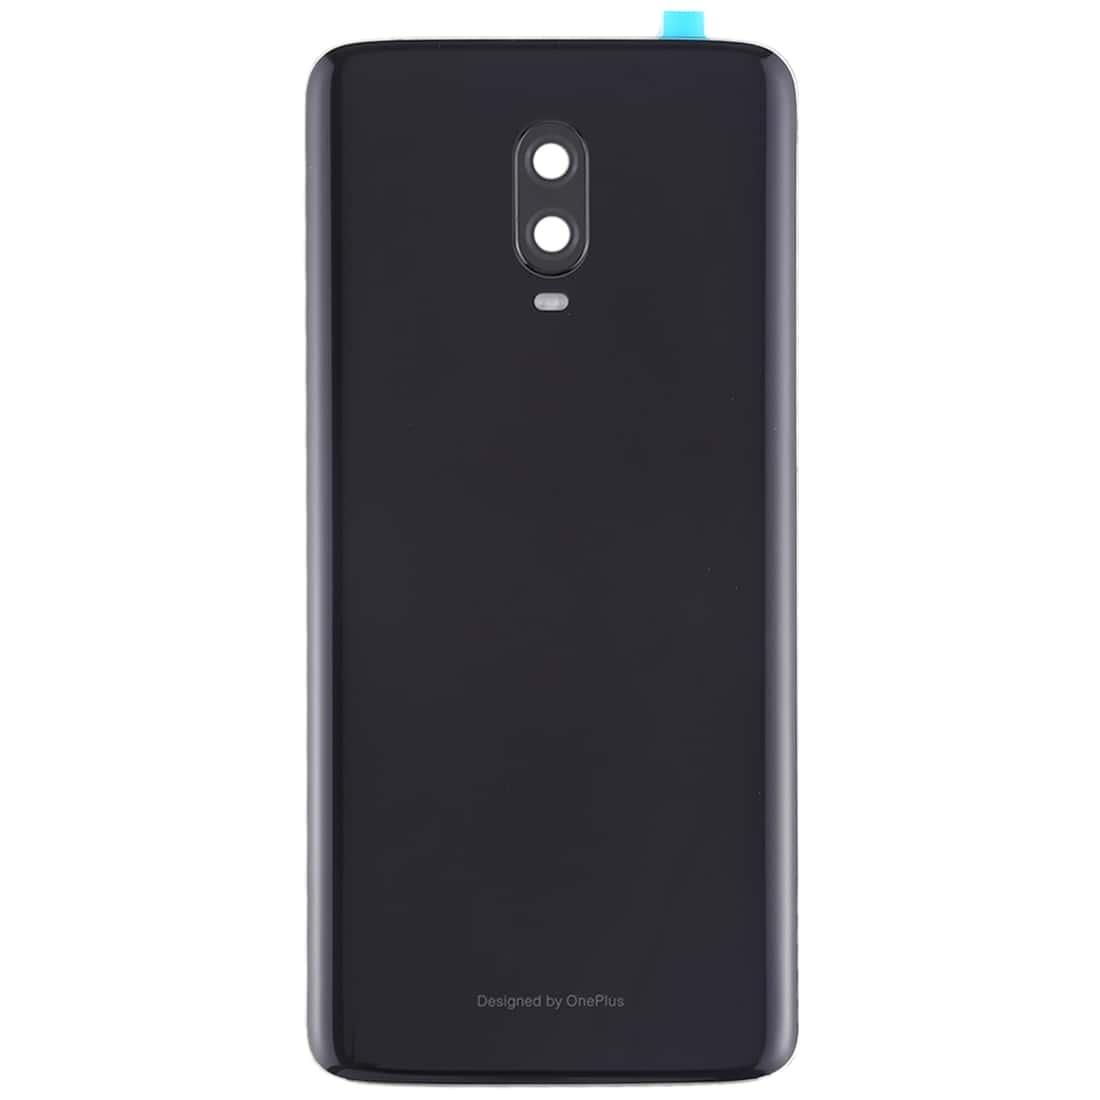 Back Glass Panel for Oneplus 6T Jet Black with Camera Lens